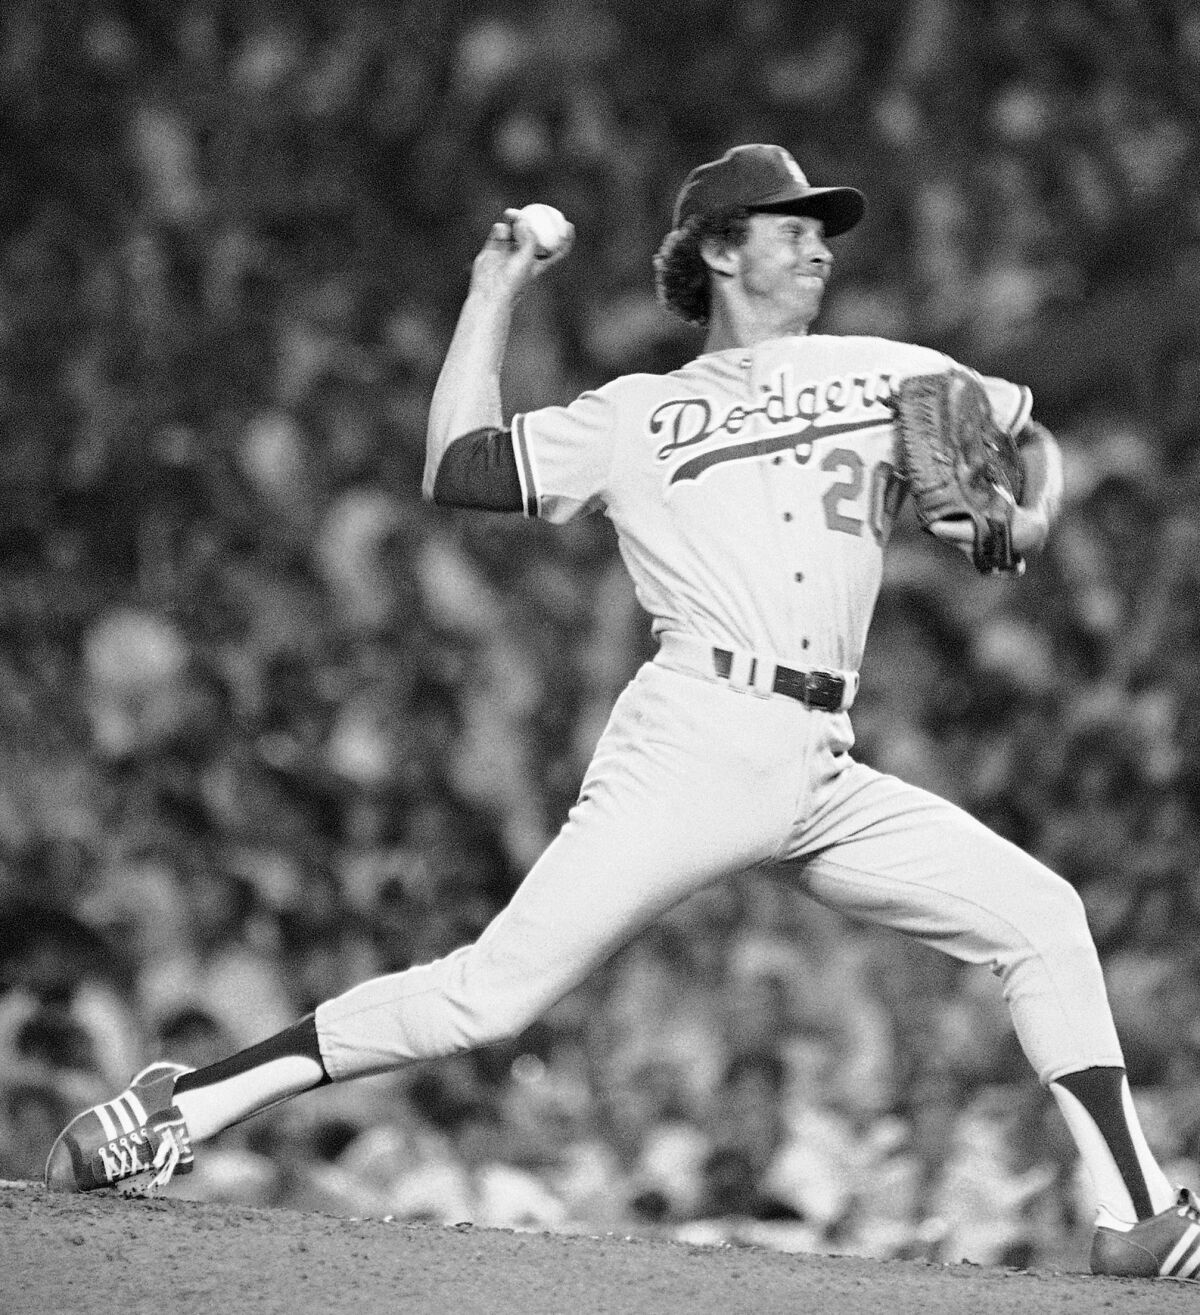 Dodgers' Don Sutton pitches in the 1977 All-Star game in New York